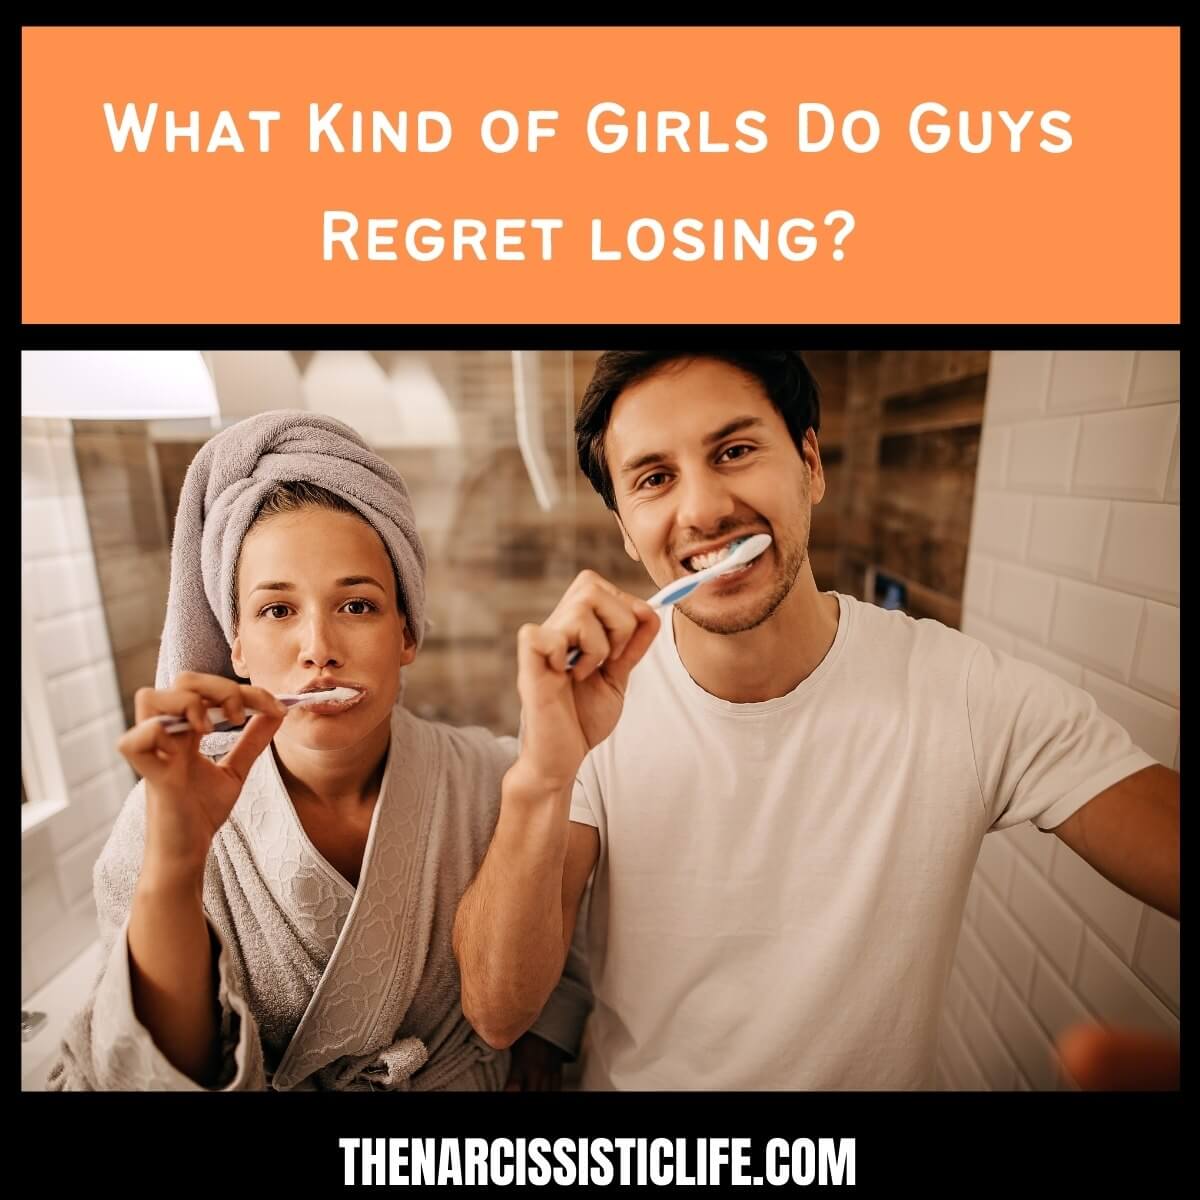 What Kind of Girls Do Guys Regret losing